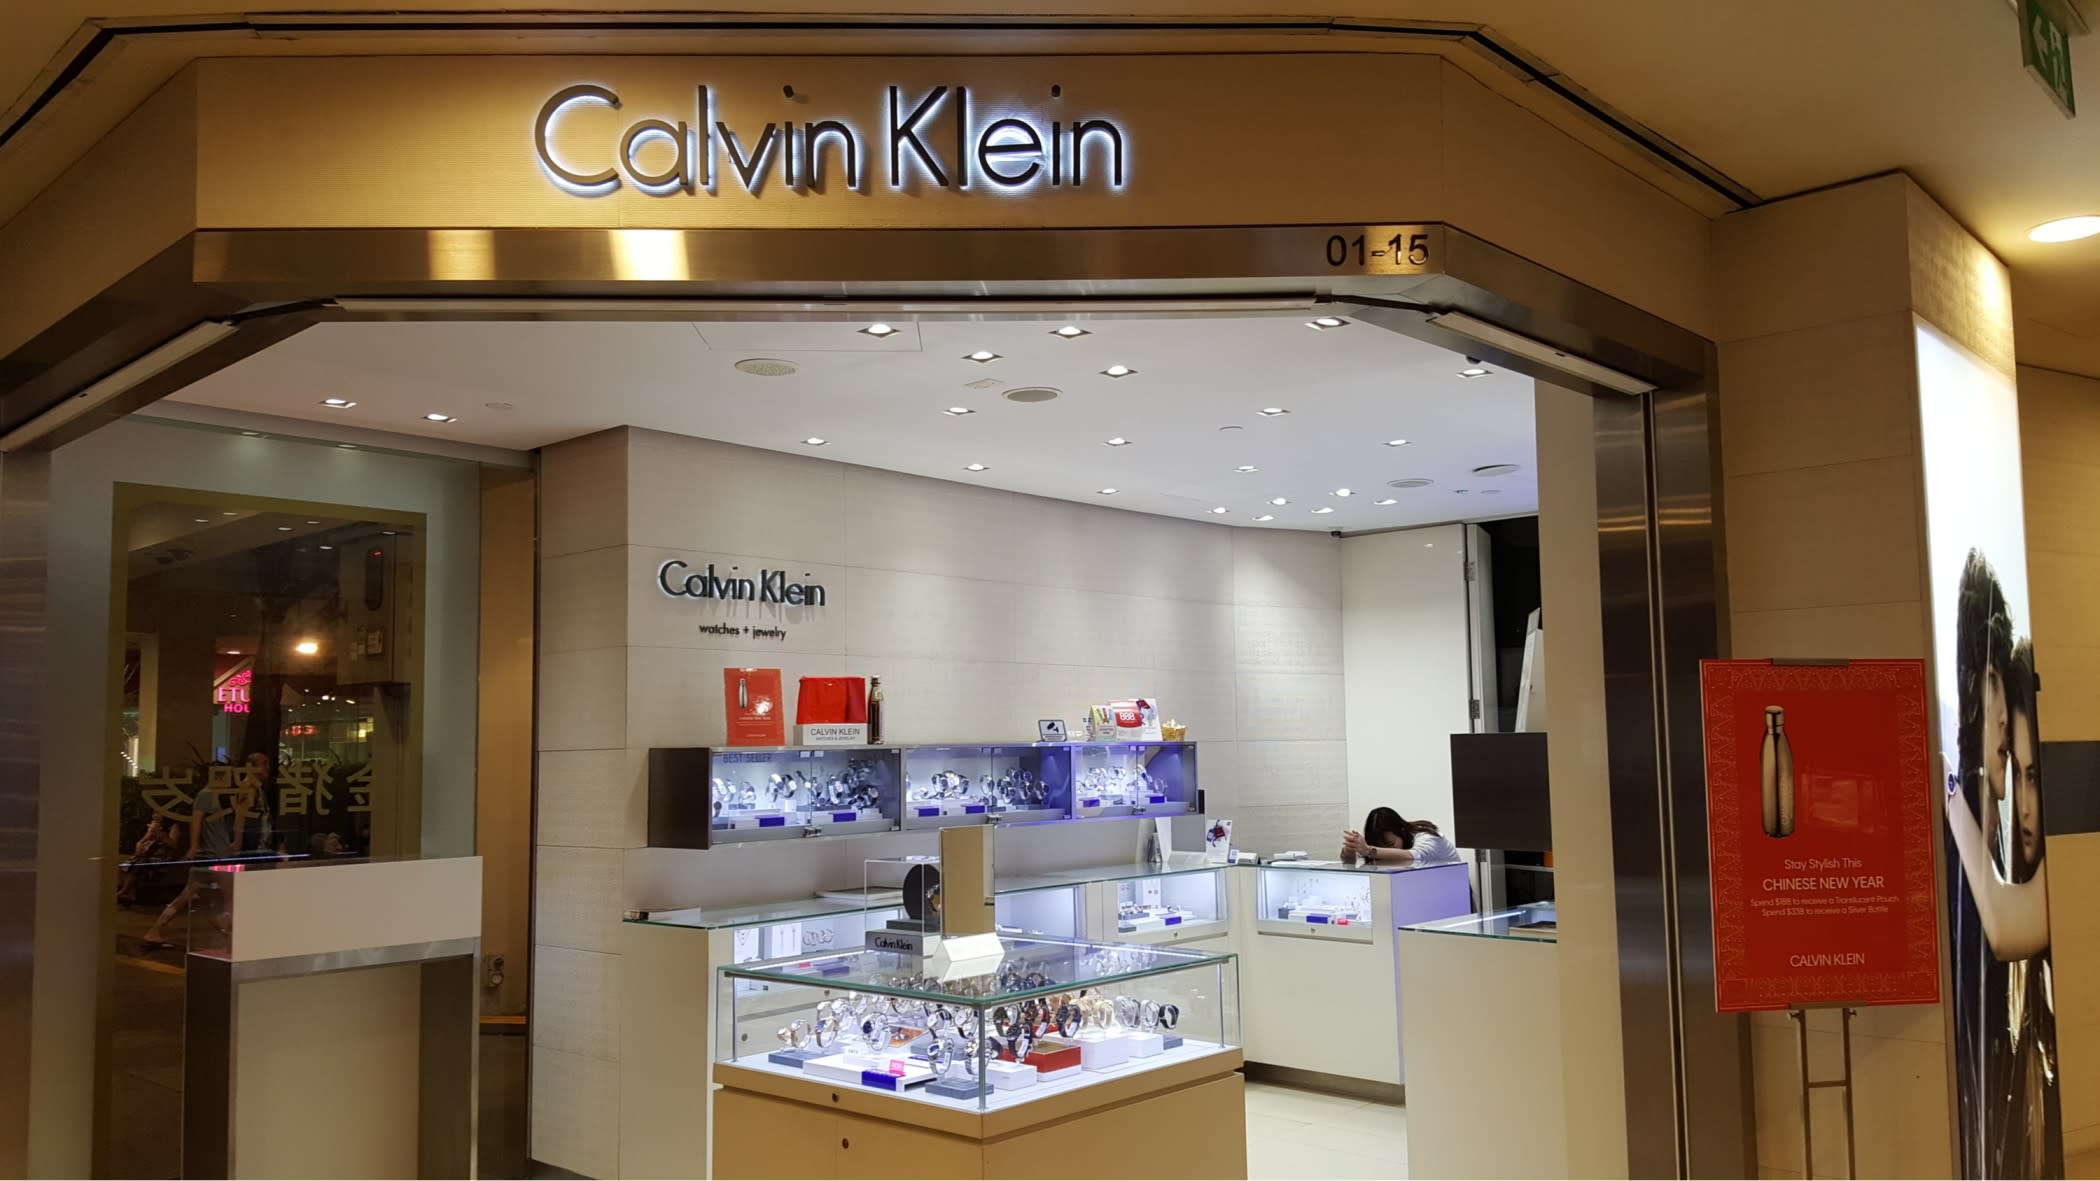 4 Things I Learned Building The Calvin Klein Brand - Branding Strategy  Insider